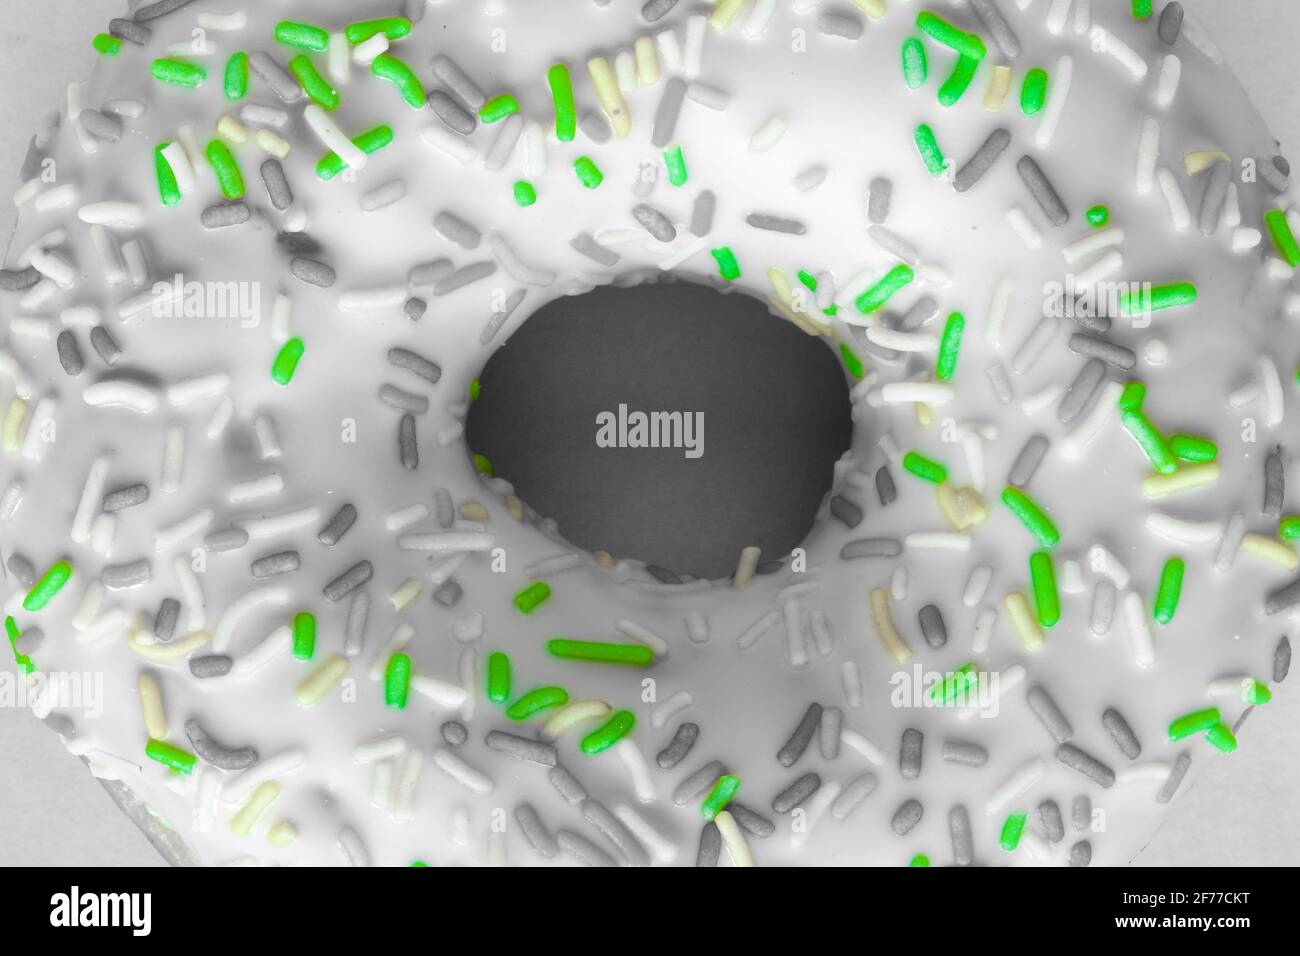 Flat-lay image of ring donut with white glaze and hundreds and thousands, black and white image with selected green colour Stock Photo